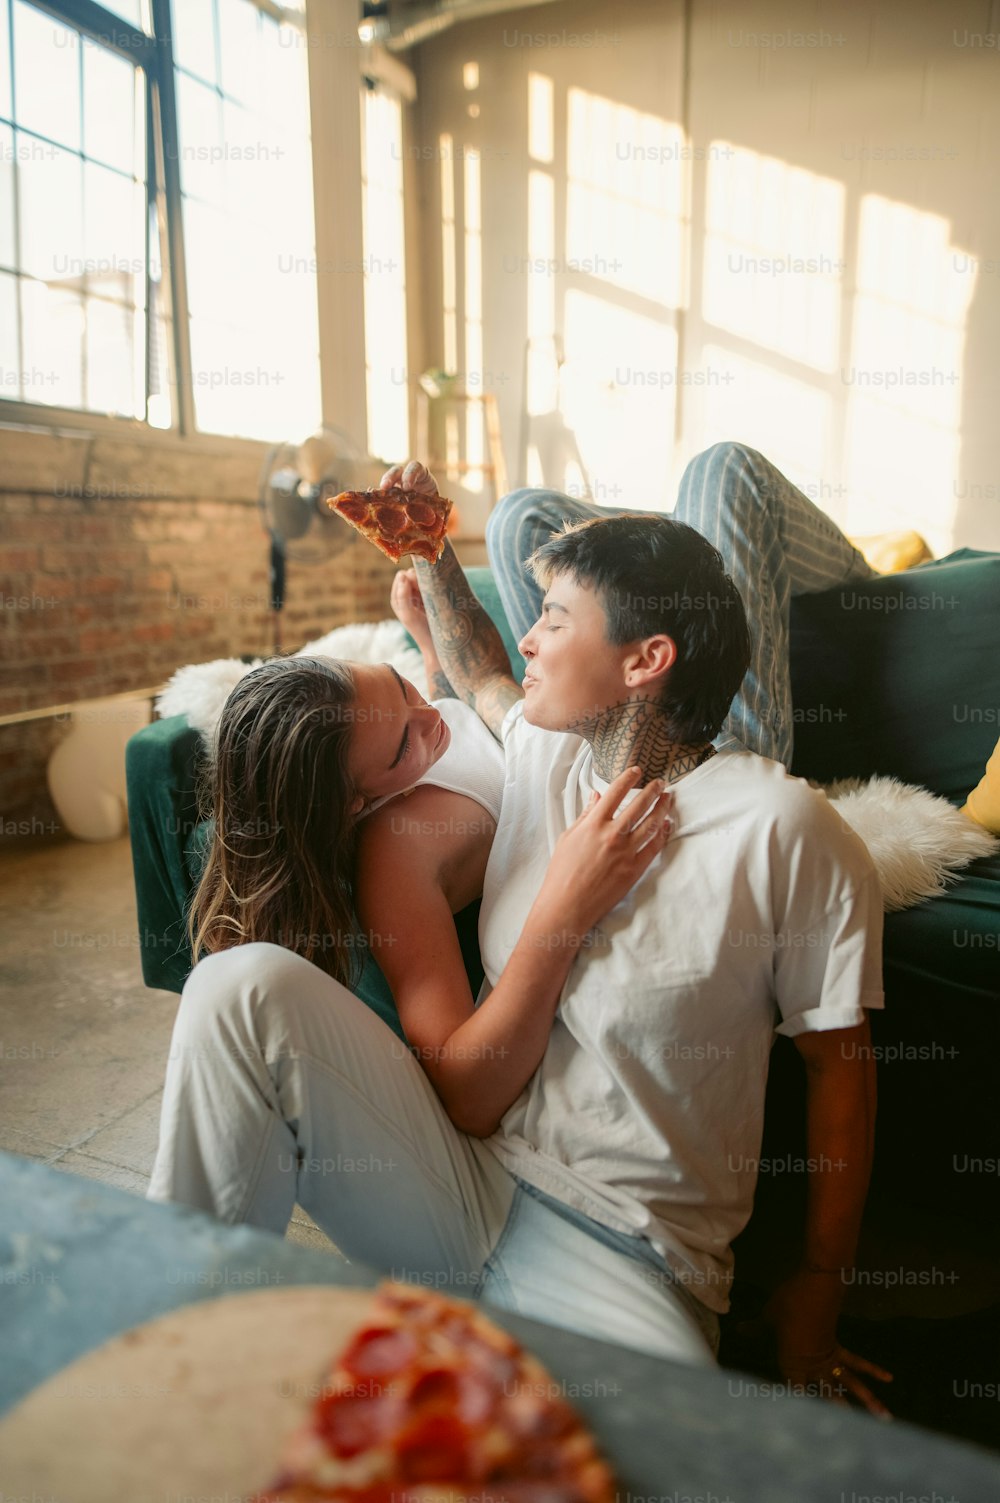 a boy and a girl sitting on a couch eating pizza